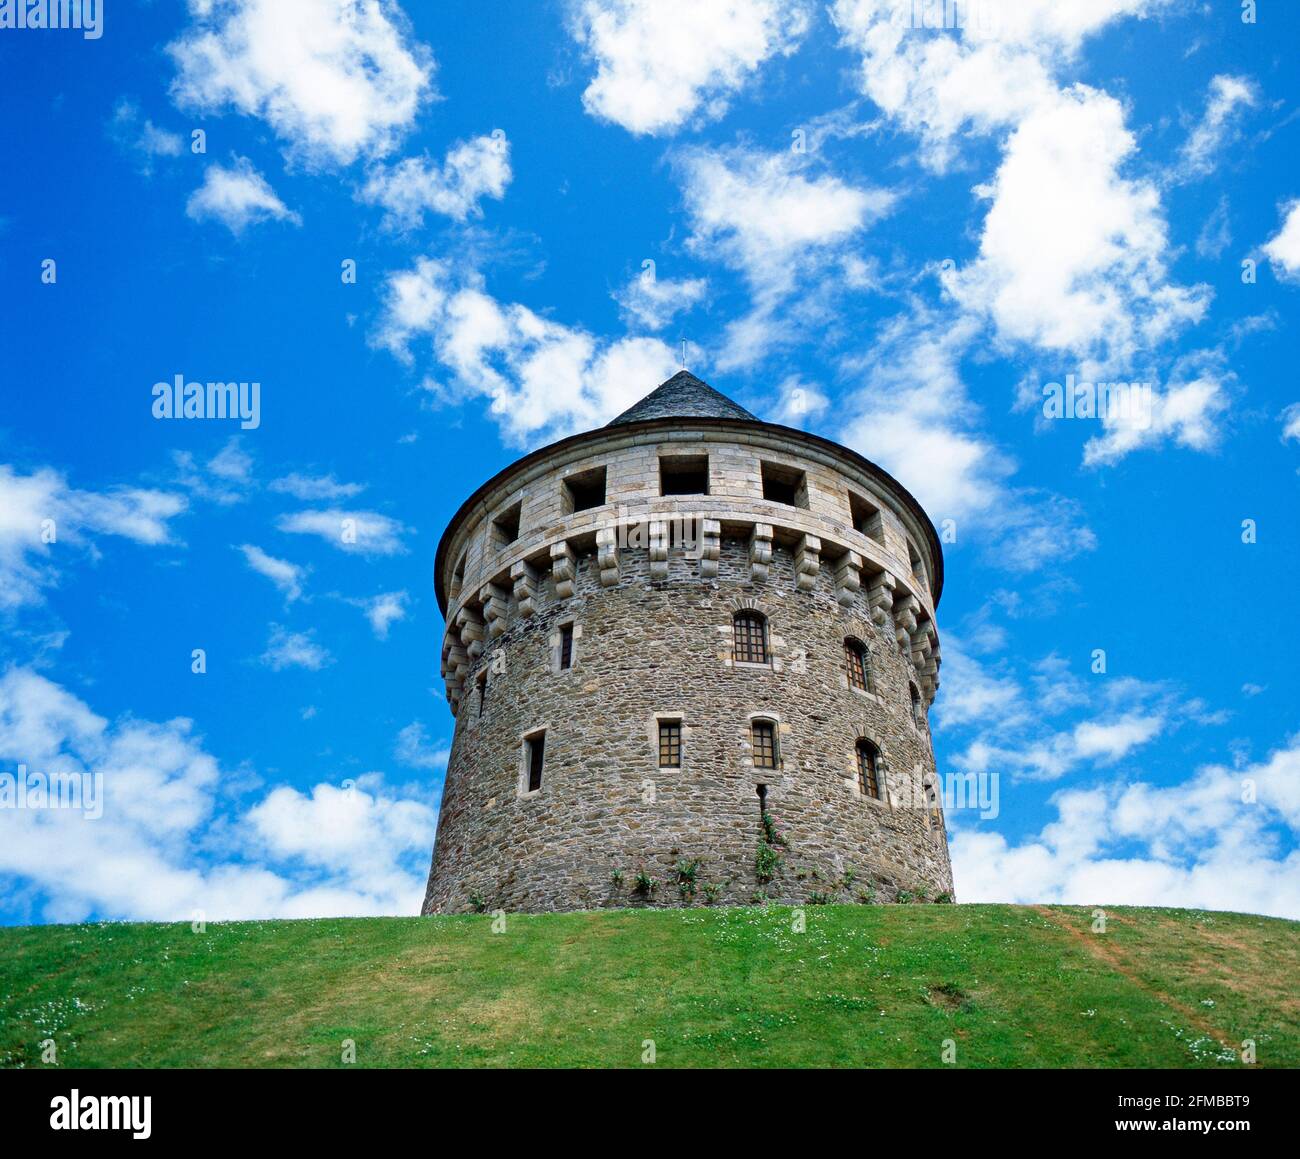 On the banks of the Penfeld riverside stands the medieval Tour Tanguy tower, which was supposed to protect the port city of Brest from enemy attacks in historical times. Stock Photo